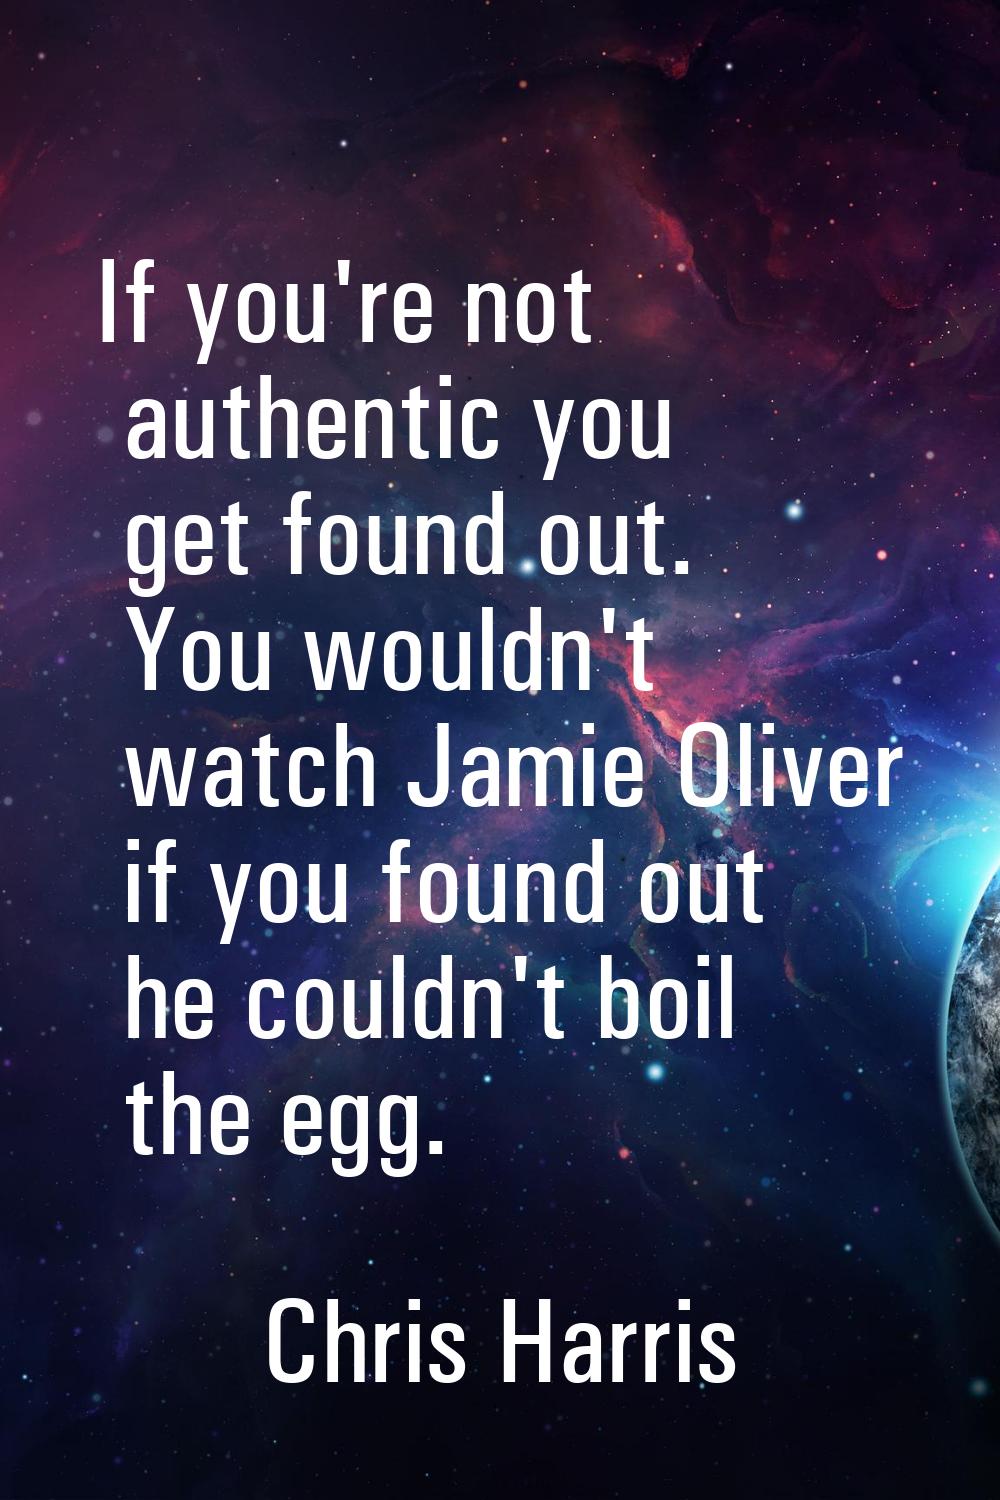 If you're not authentic you get found out. You wouldn't watch Jamie Oliver if you found out he coul